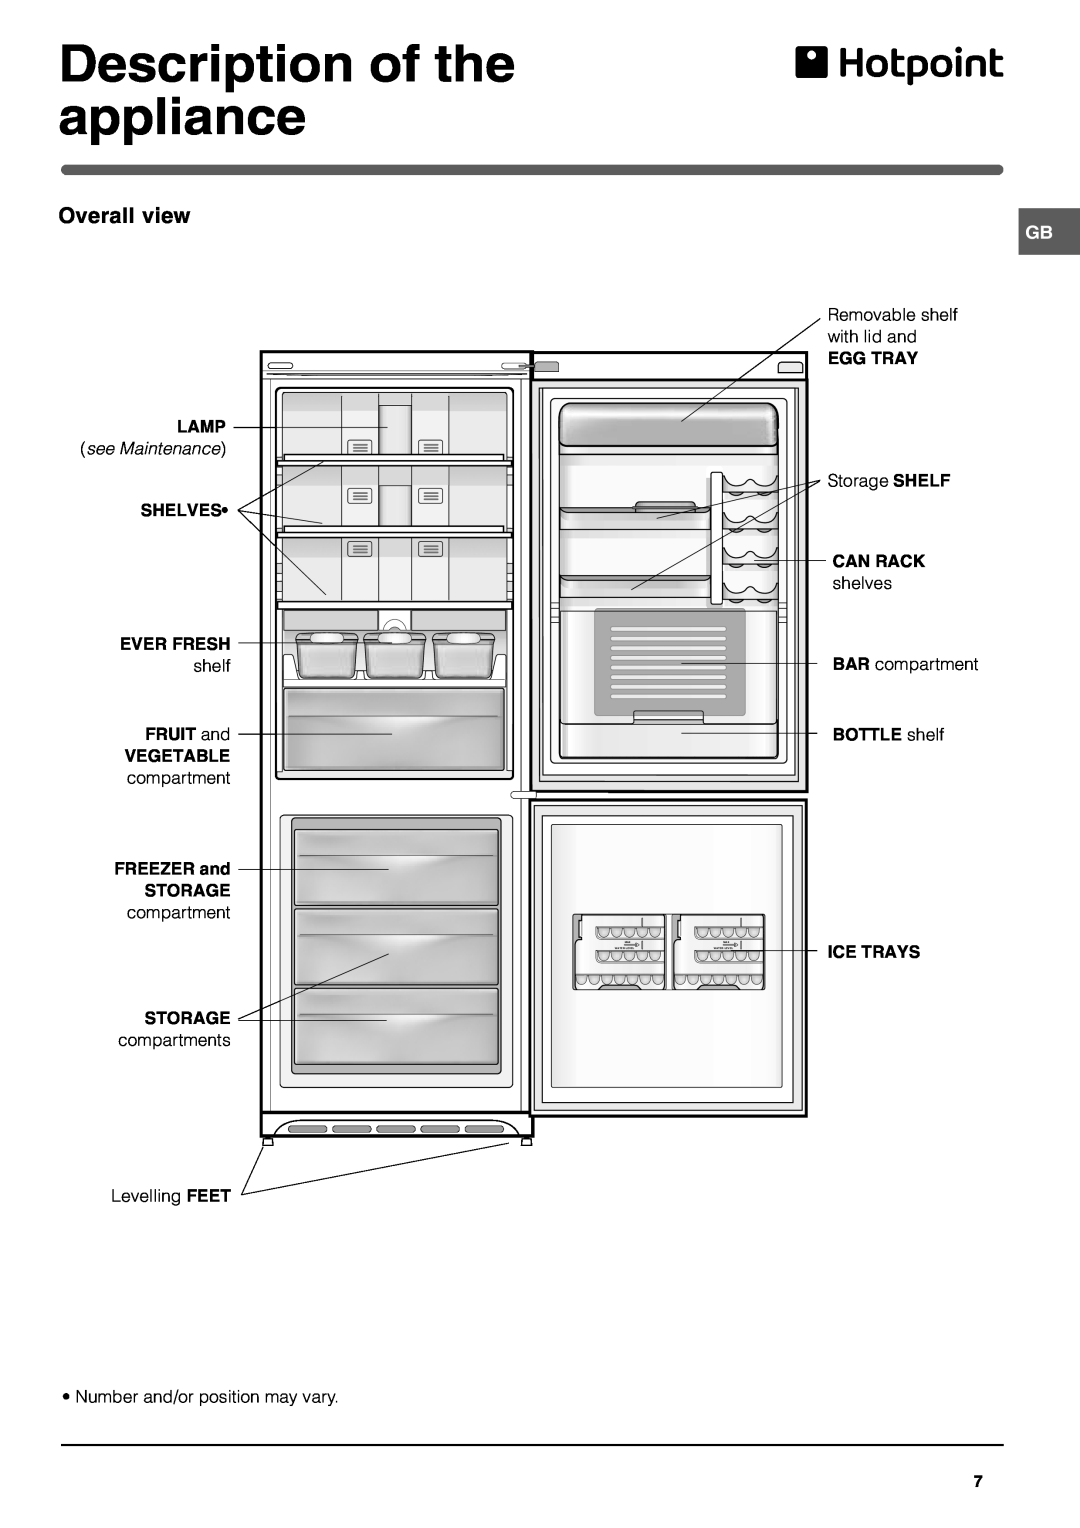 Hotpoint FFL49 Description of the appliance, Egg Tray, Lamp, see Maintenance, Shelves, Can Rack, Ever Fresh, FRUIT and 